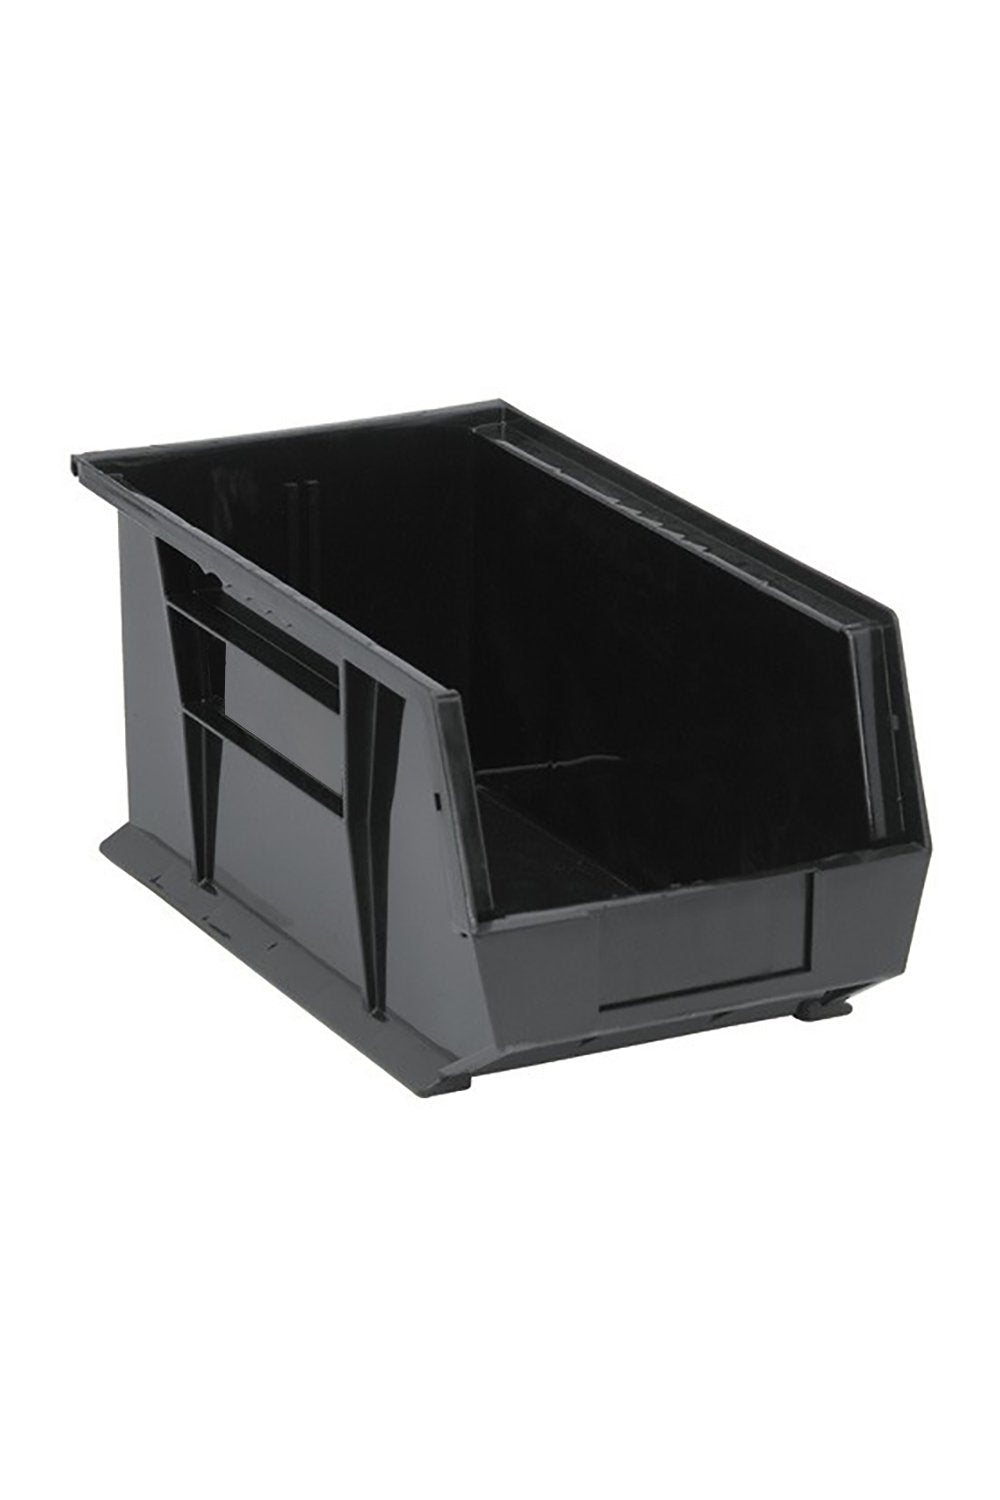 Recycled Ultra Hang and Stack Bin Bins & Containers Acart 14-3/4"L x 8-1/4"W x 7"H Black 